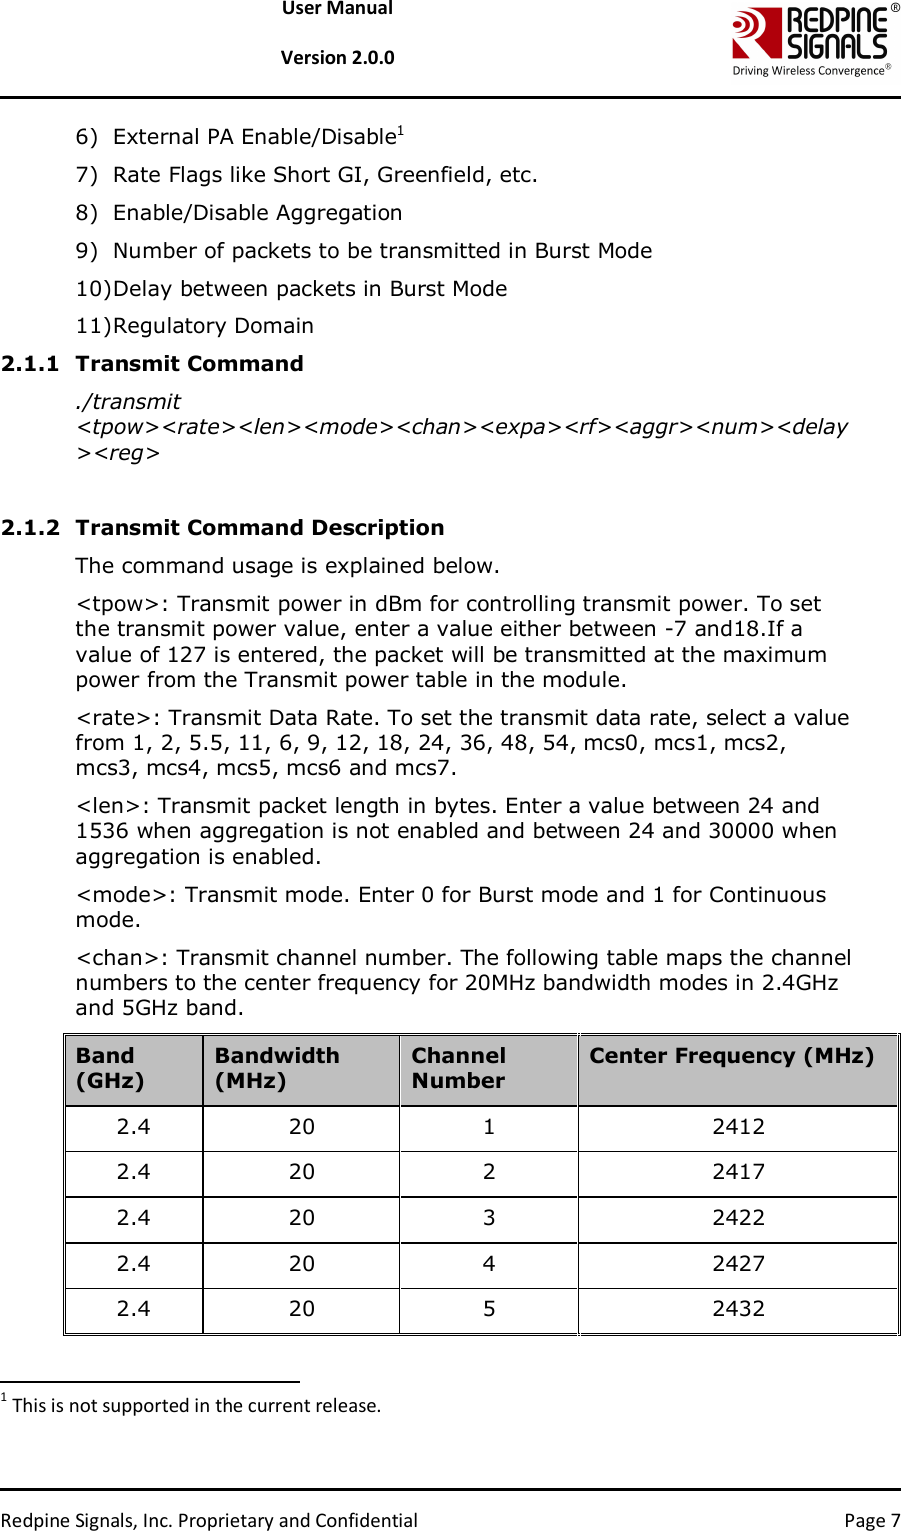   Redpine Signals, Inc. Proprietary and Confidential  Page 7 User Manual  Version 2.0.0 6) External PA Enable/Disable1 7) Rate Flags like Short GI, Greenfield, etc. 8) Enable/Disable Aggregation  9) Number of packets to be transmitted in Burst Mode 10) Delay between packets in Burst Mode 11) Regulatory Domain 2.1.1 Transmit Command ./transmit &lt;tpow&gt;&lt;rate&gt;&lt;len&gt;&lt;mode&gt;&lt;chan&gt;&lt;expa&gt;&lt;rf&gt;&lt;aggr&gt;&lt;num&gt;&lt;delay&gt;&lt;reg&gt;  2.1.2 Transmit Command Description The command usage is explained below.  &lt;tpow&gt;: Transmit power in dBm for controlling transmit power. To set the transmit power value, enter a value either between -7 and18.If a value of 127 is entered, the packet will be transmitted at the maximum power from the Transmit power table in the module.   &lt;rate&gt;: Transmit Data Rate. To set the transmit data rate, select a value from 1, 2, 5.5, 11, 6, 9, 12, 18, 24, 36, 48, 54, mcs0, mcs1, mcs2, mcs3, mcs4, mcs5, mcs6 and mcs7.  &lt;len&gt;: Transmit packet length in bytes. Enter a value between 24 and 1536 when aggregation is not enabled and between 24 and 30000 when aggregation is enabled.  &lt;mode&gt;: Transmit mode. Enter 0 for Burst mode and 1 for Continuous mode.  &lt;chan&gt;: Transmit channel number. The following table maps the channel numbers to the center frequency for 20MHz bandwidth modes in 2.4GHz and 5GHz band.  Band (GHz) Bandwidth (MHz) Channel Number Center Frequency (MHz) 2.4  20  1  2412 2.4  20  2  2417 2.4  20  3  2422 2.4  20  4  2427 2.4  20  5  2432                                                                1 This is not supported in the current release.  